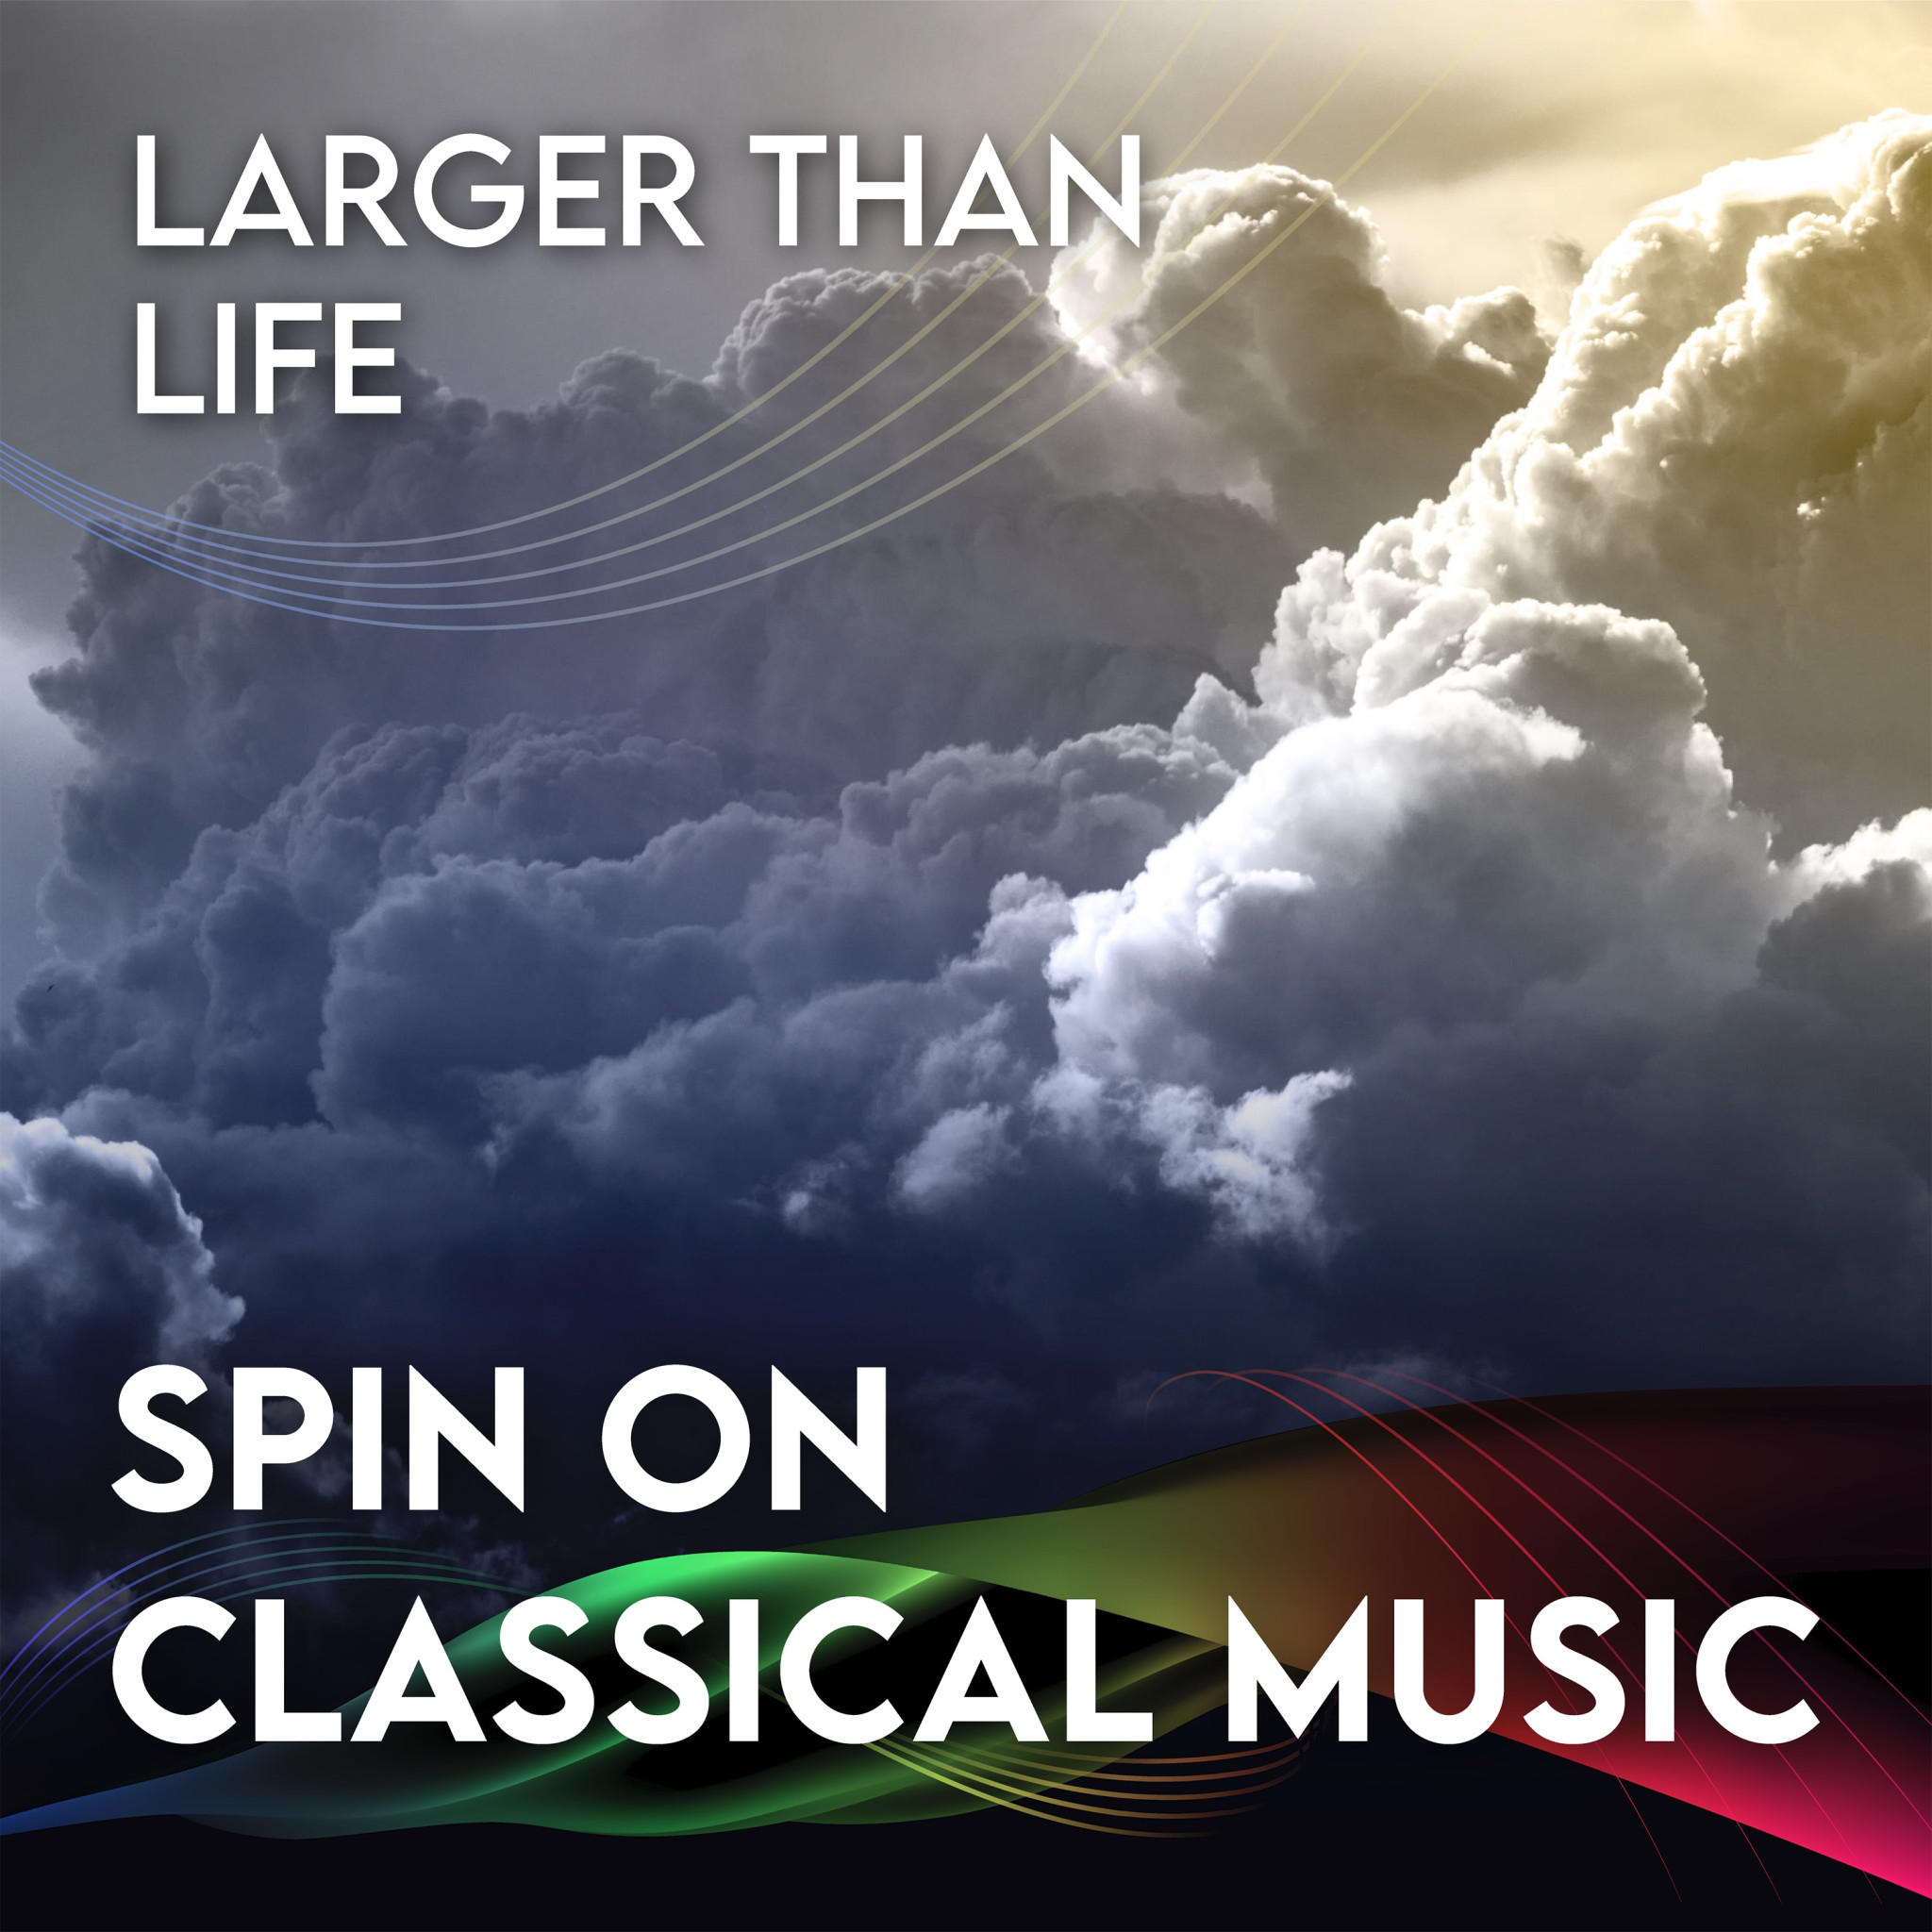 Spin On Classical Music 3 - Larger Than Life eAlbum Cover